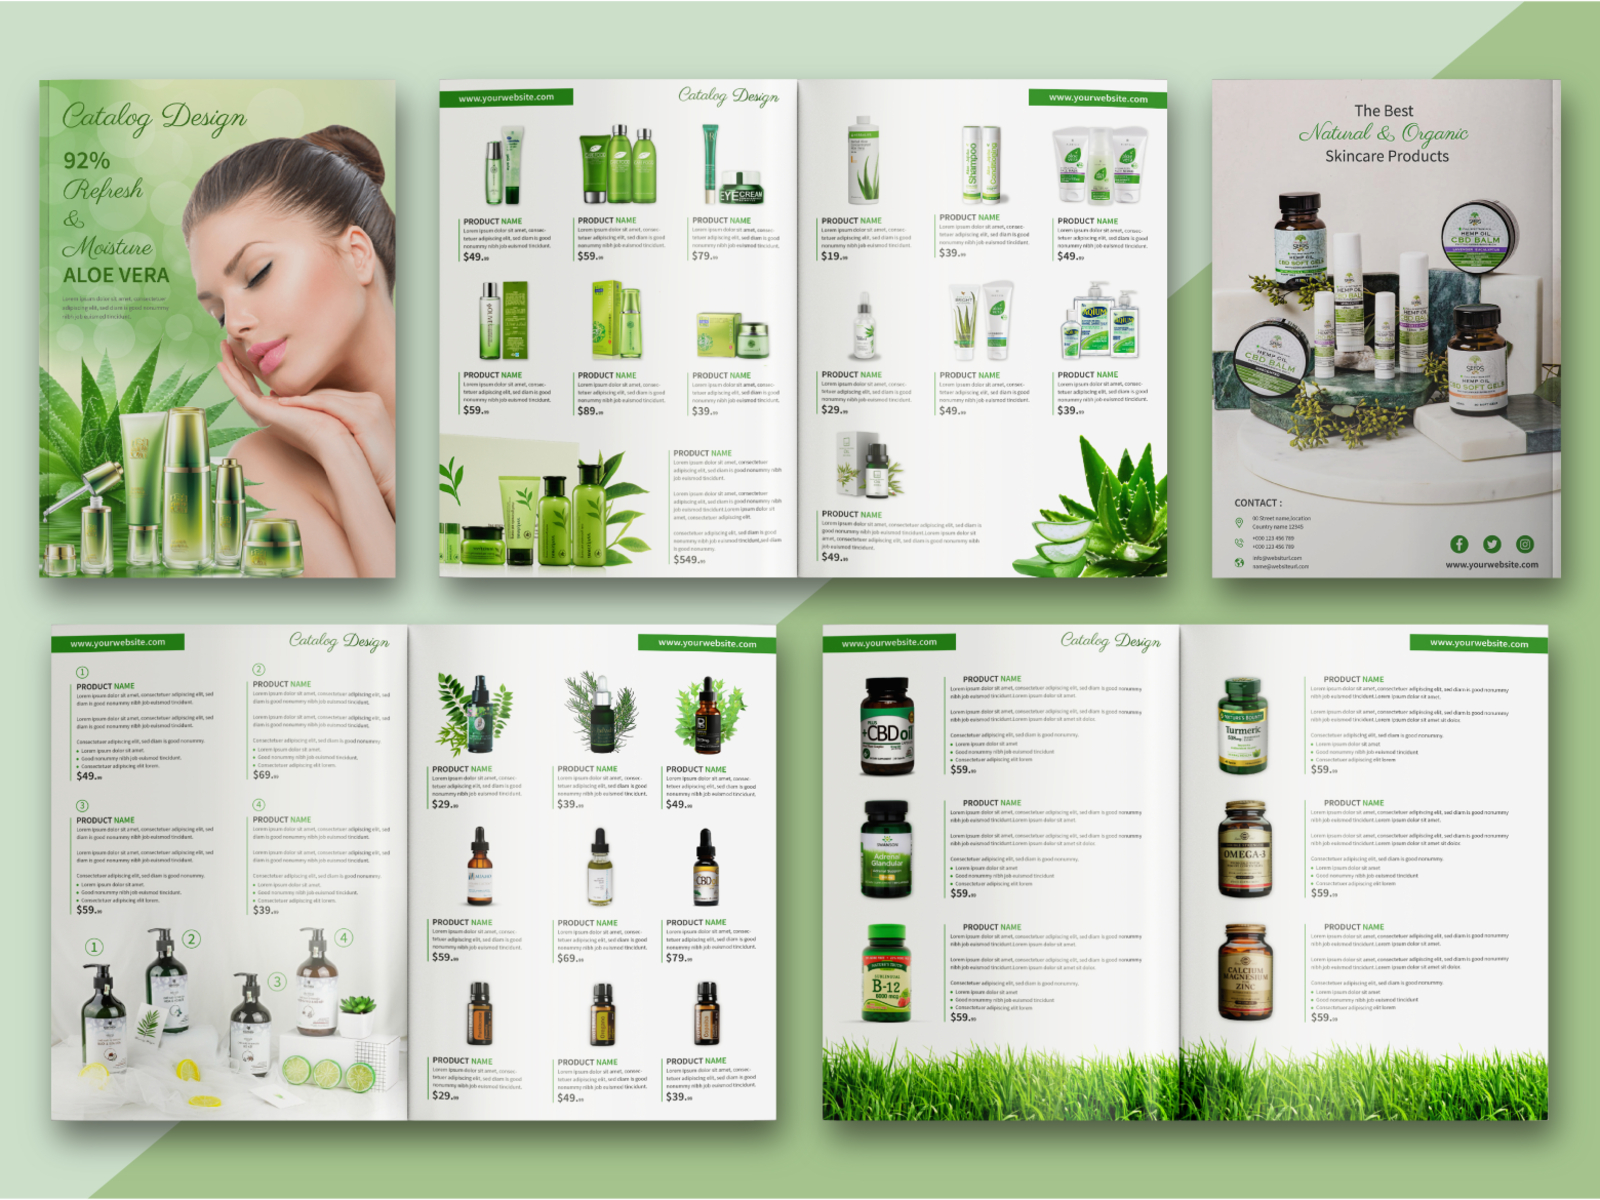 cosmetics-products-catalog-or-brochure-template-by-khan-asma-akther-on-dribbble